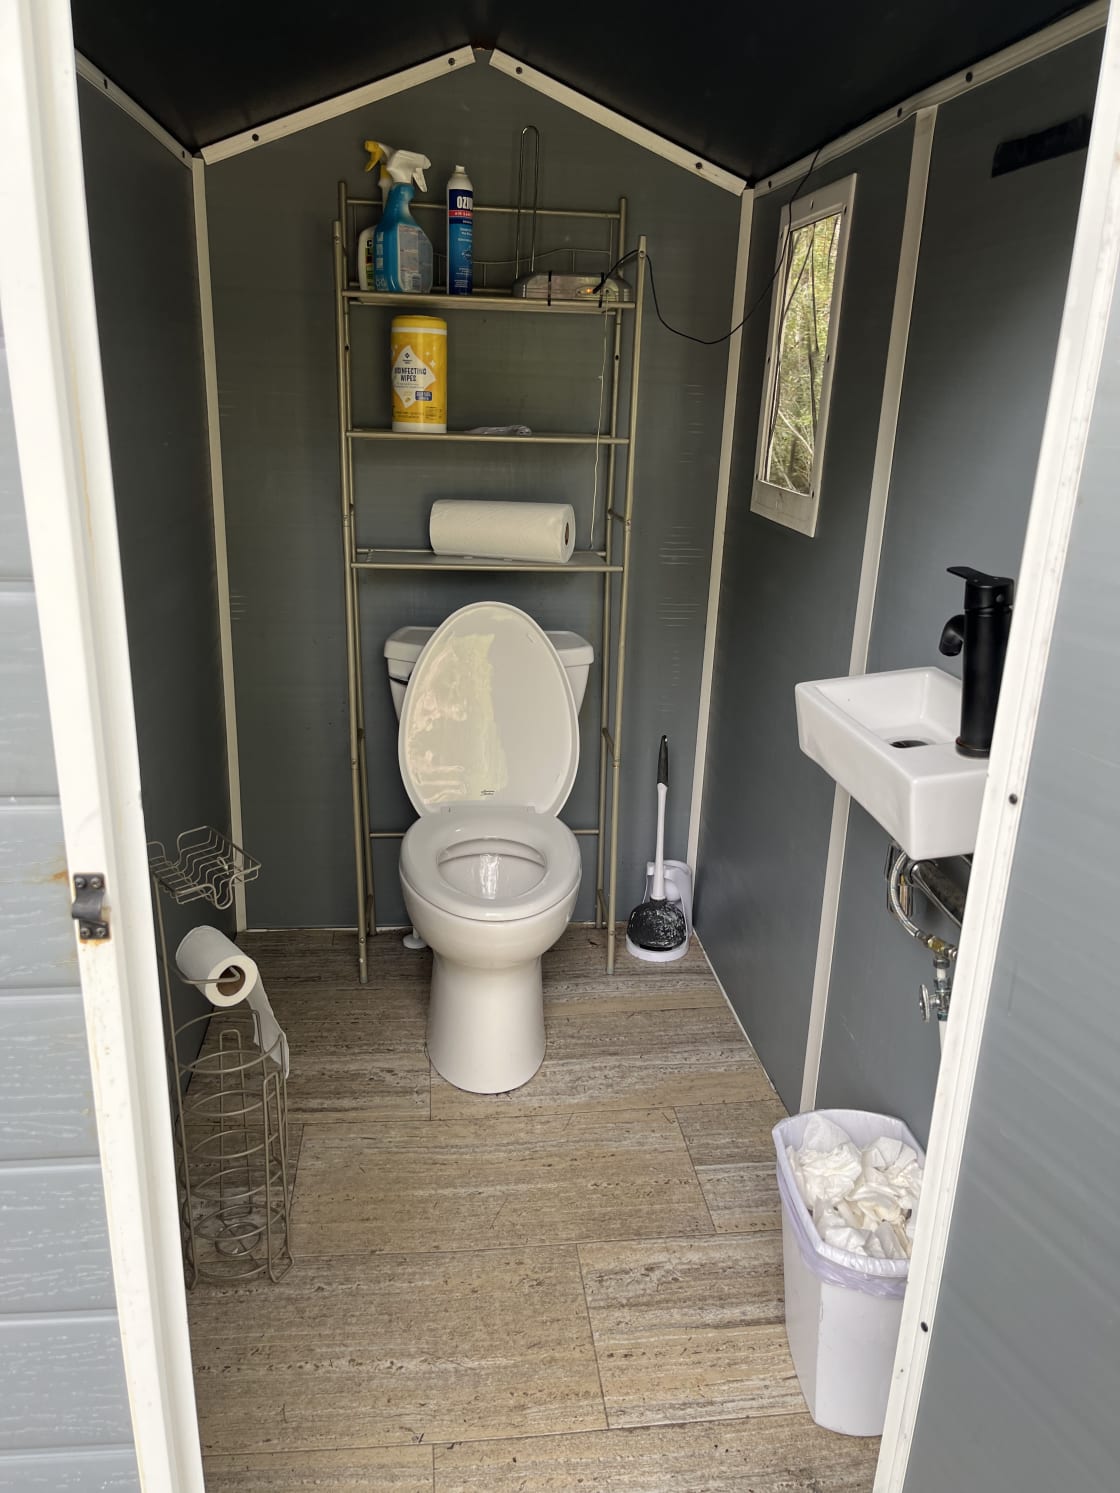 Private toilet and sink